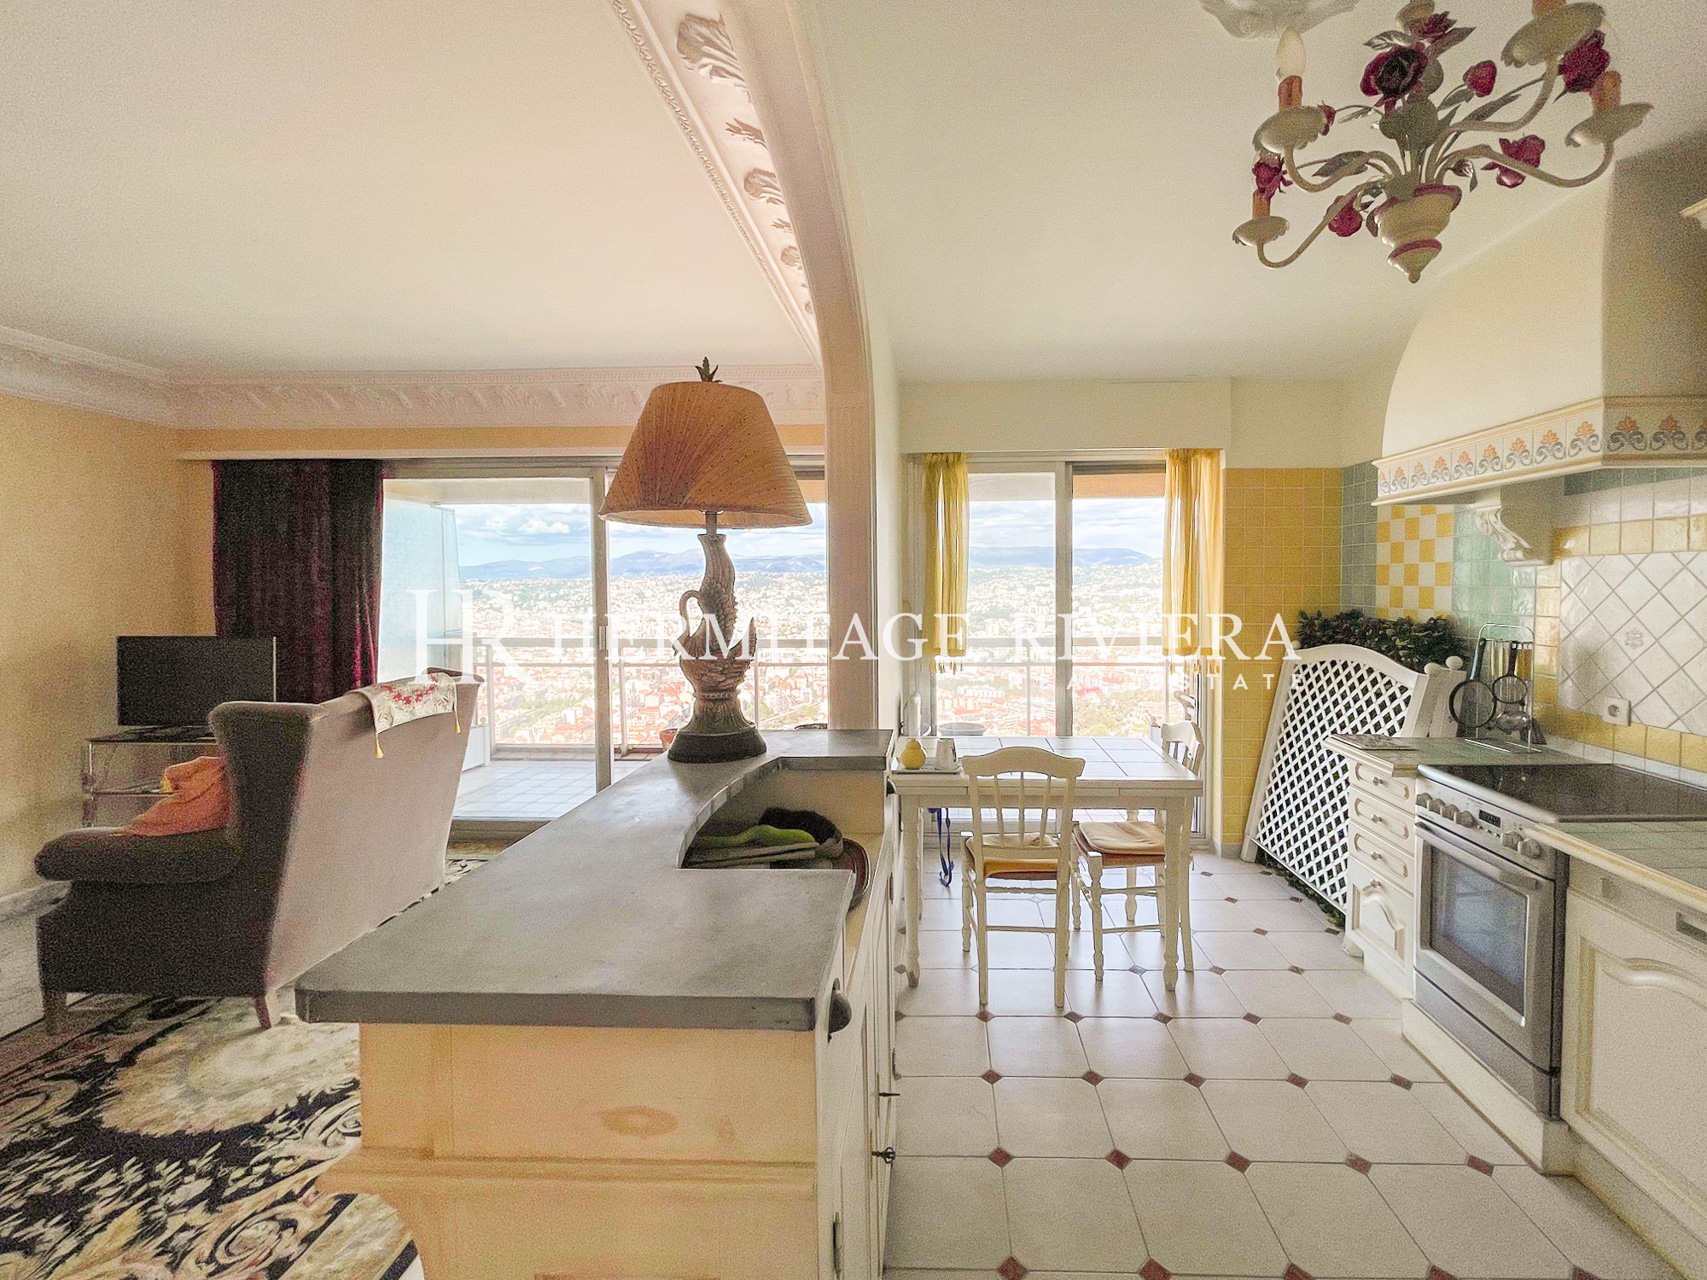 Top floor two bedroom apartment with views over Nice and the sea (image 10)